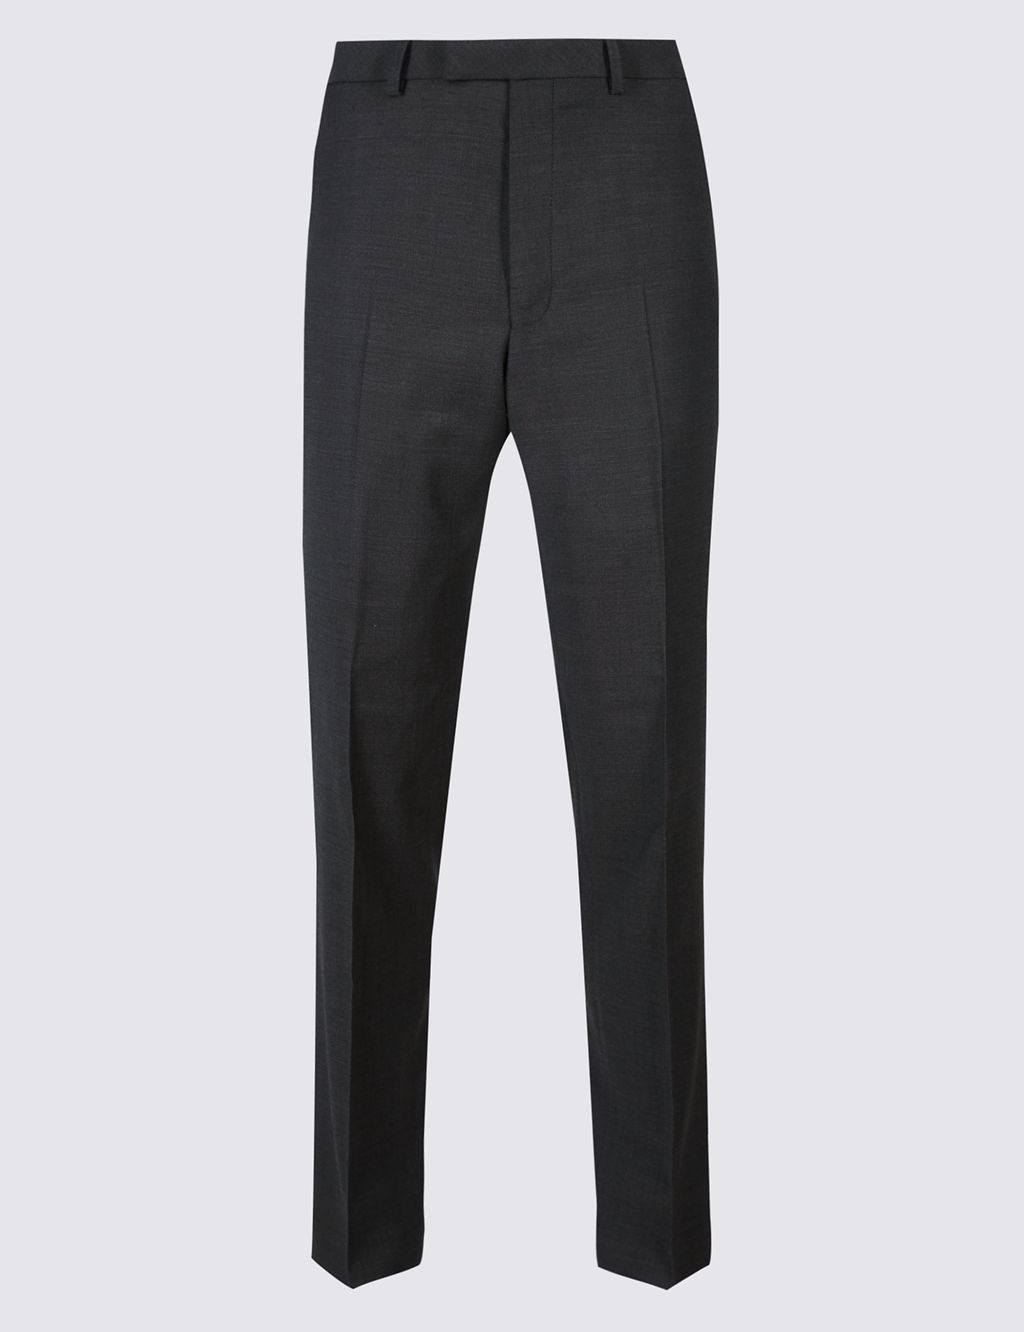 Charcoal Tailored Fit Wool Trousers 1 of 6